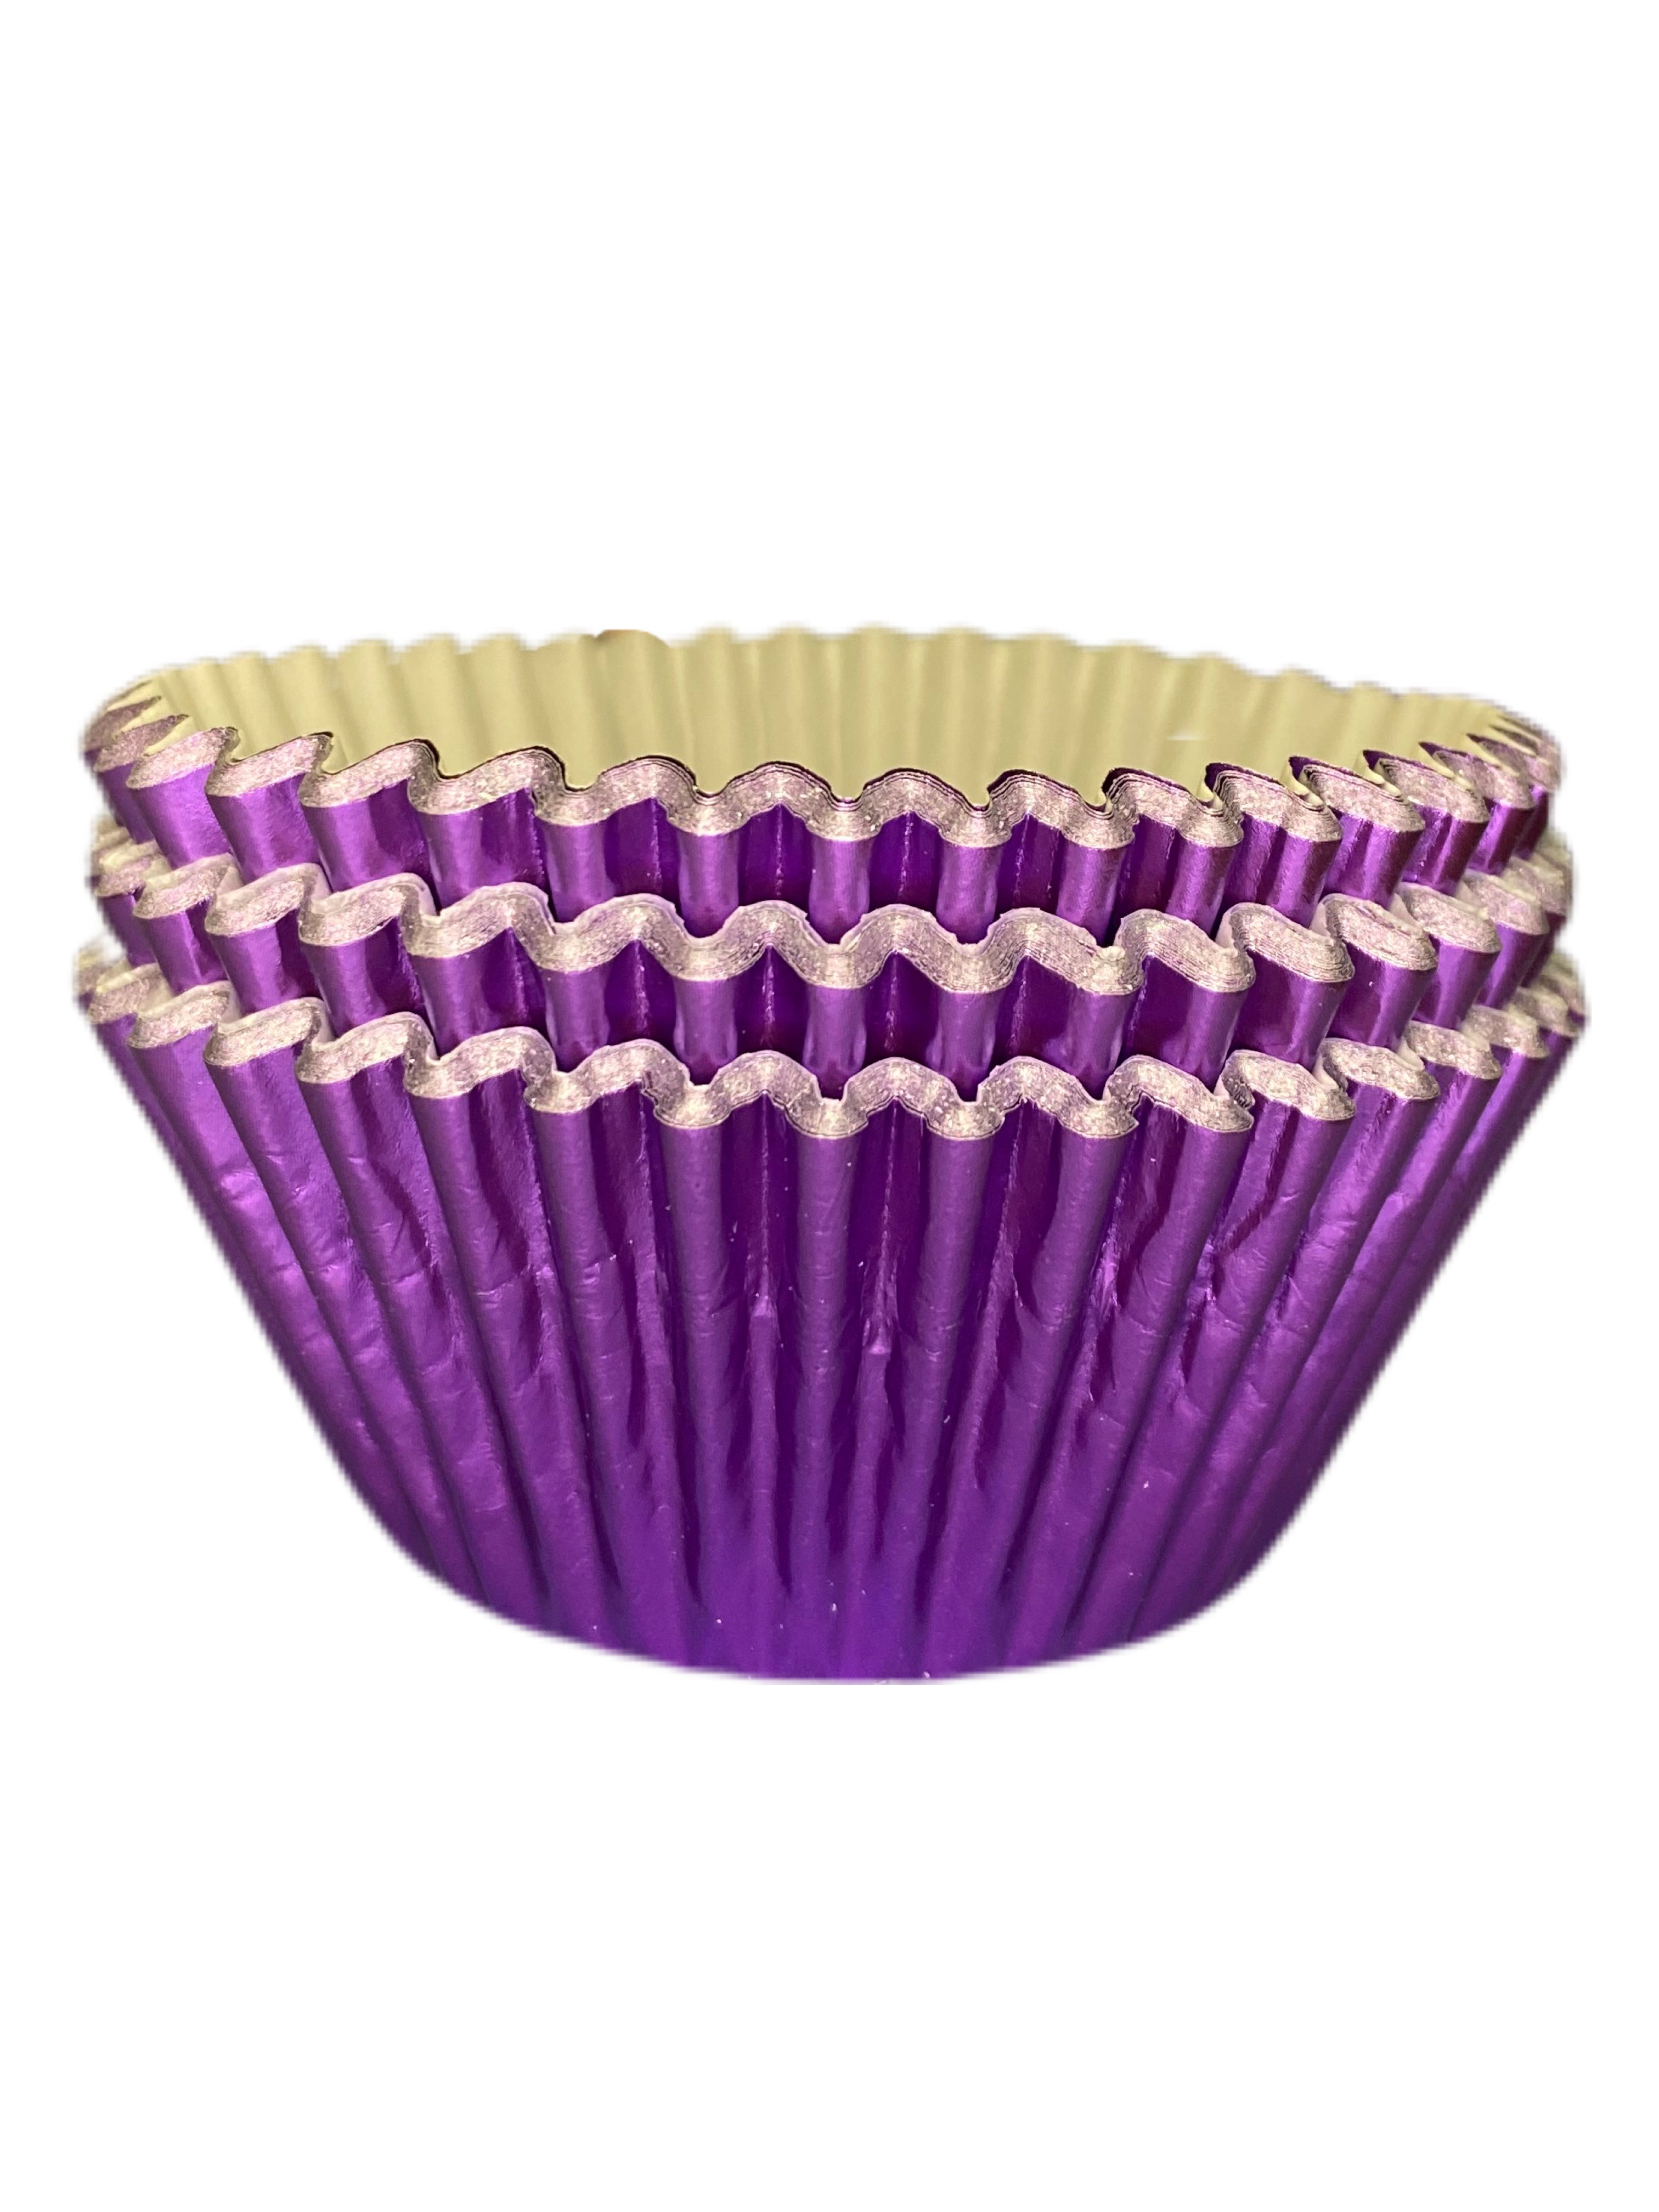 Purple Foil Cupcake / Muffin Baking Cases Pack of Approx 36 - Kate's Cupboard